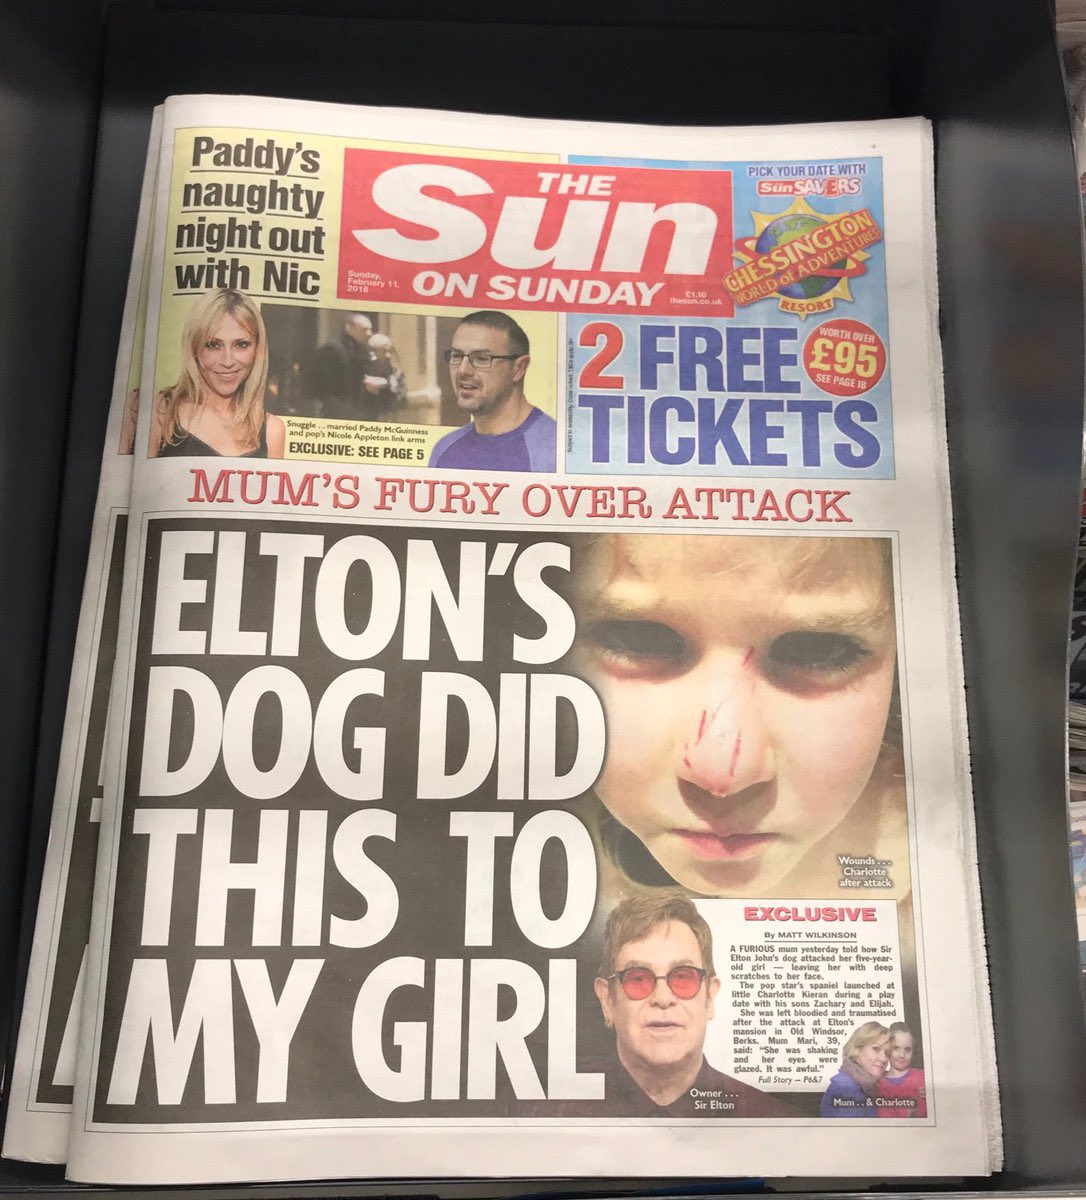 In 2018, The sun AGAIN published a story on Elton John and his husband that was not true, the article described an incident at their home in which a young girl on a play date was allegedly attacked by their dog and left with “Freddy Krueger-like injuries”